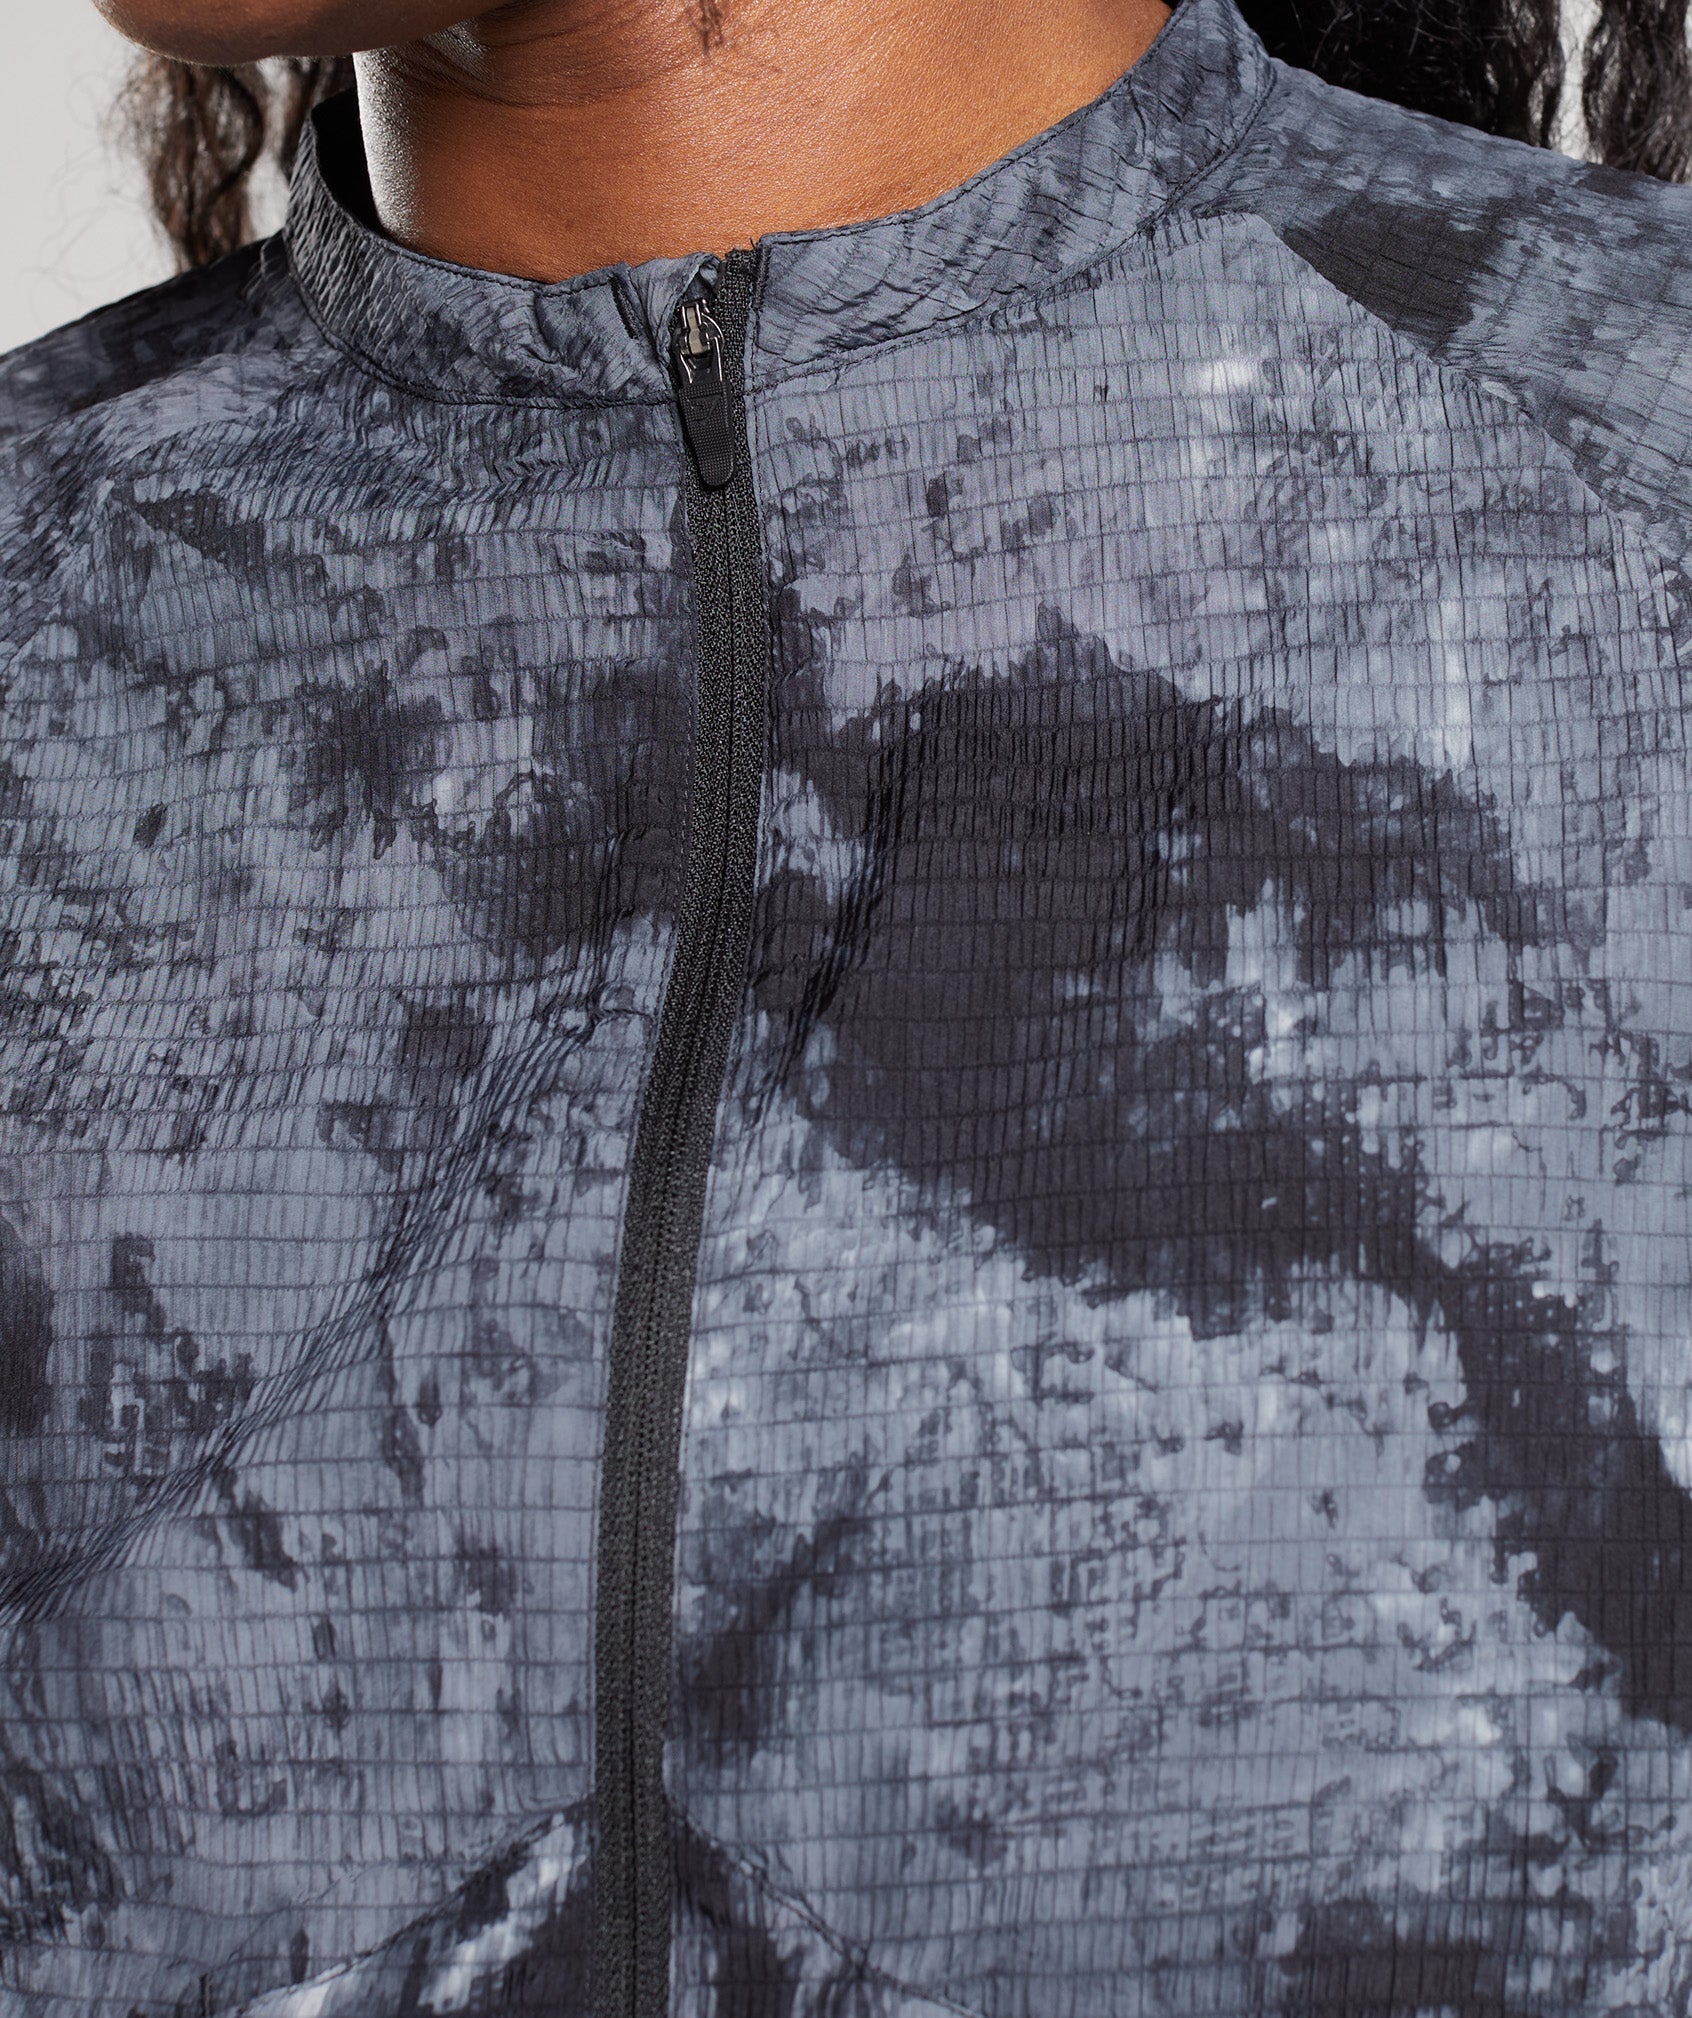 Elevate Woven Jacket in Coin Grey Spray Dye - view 8